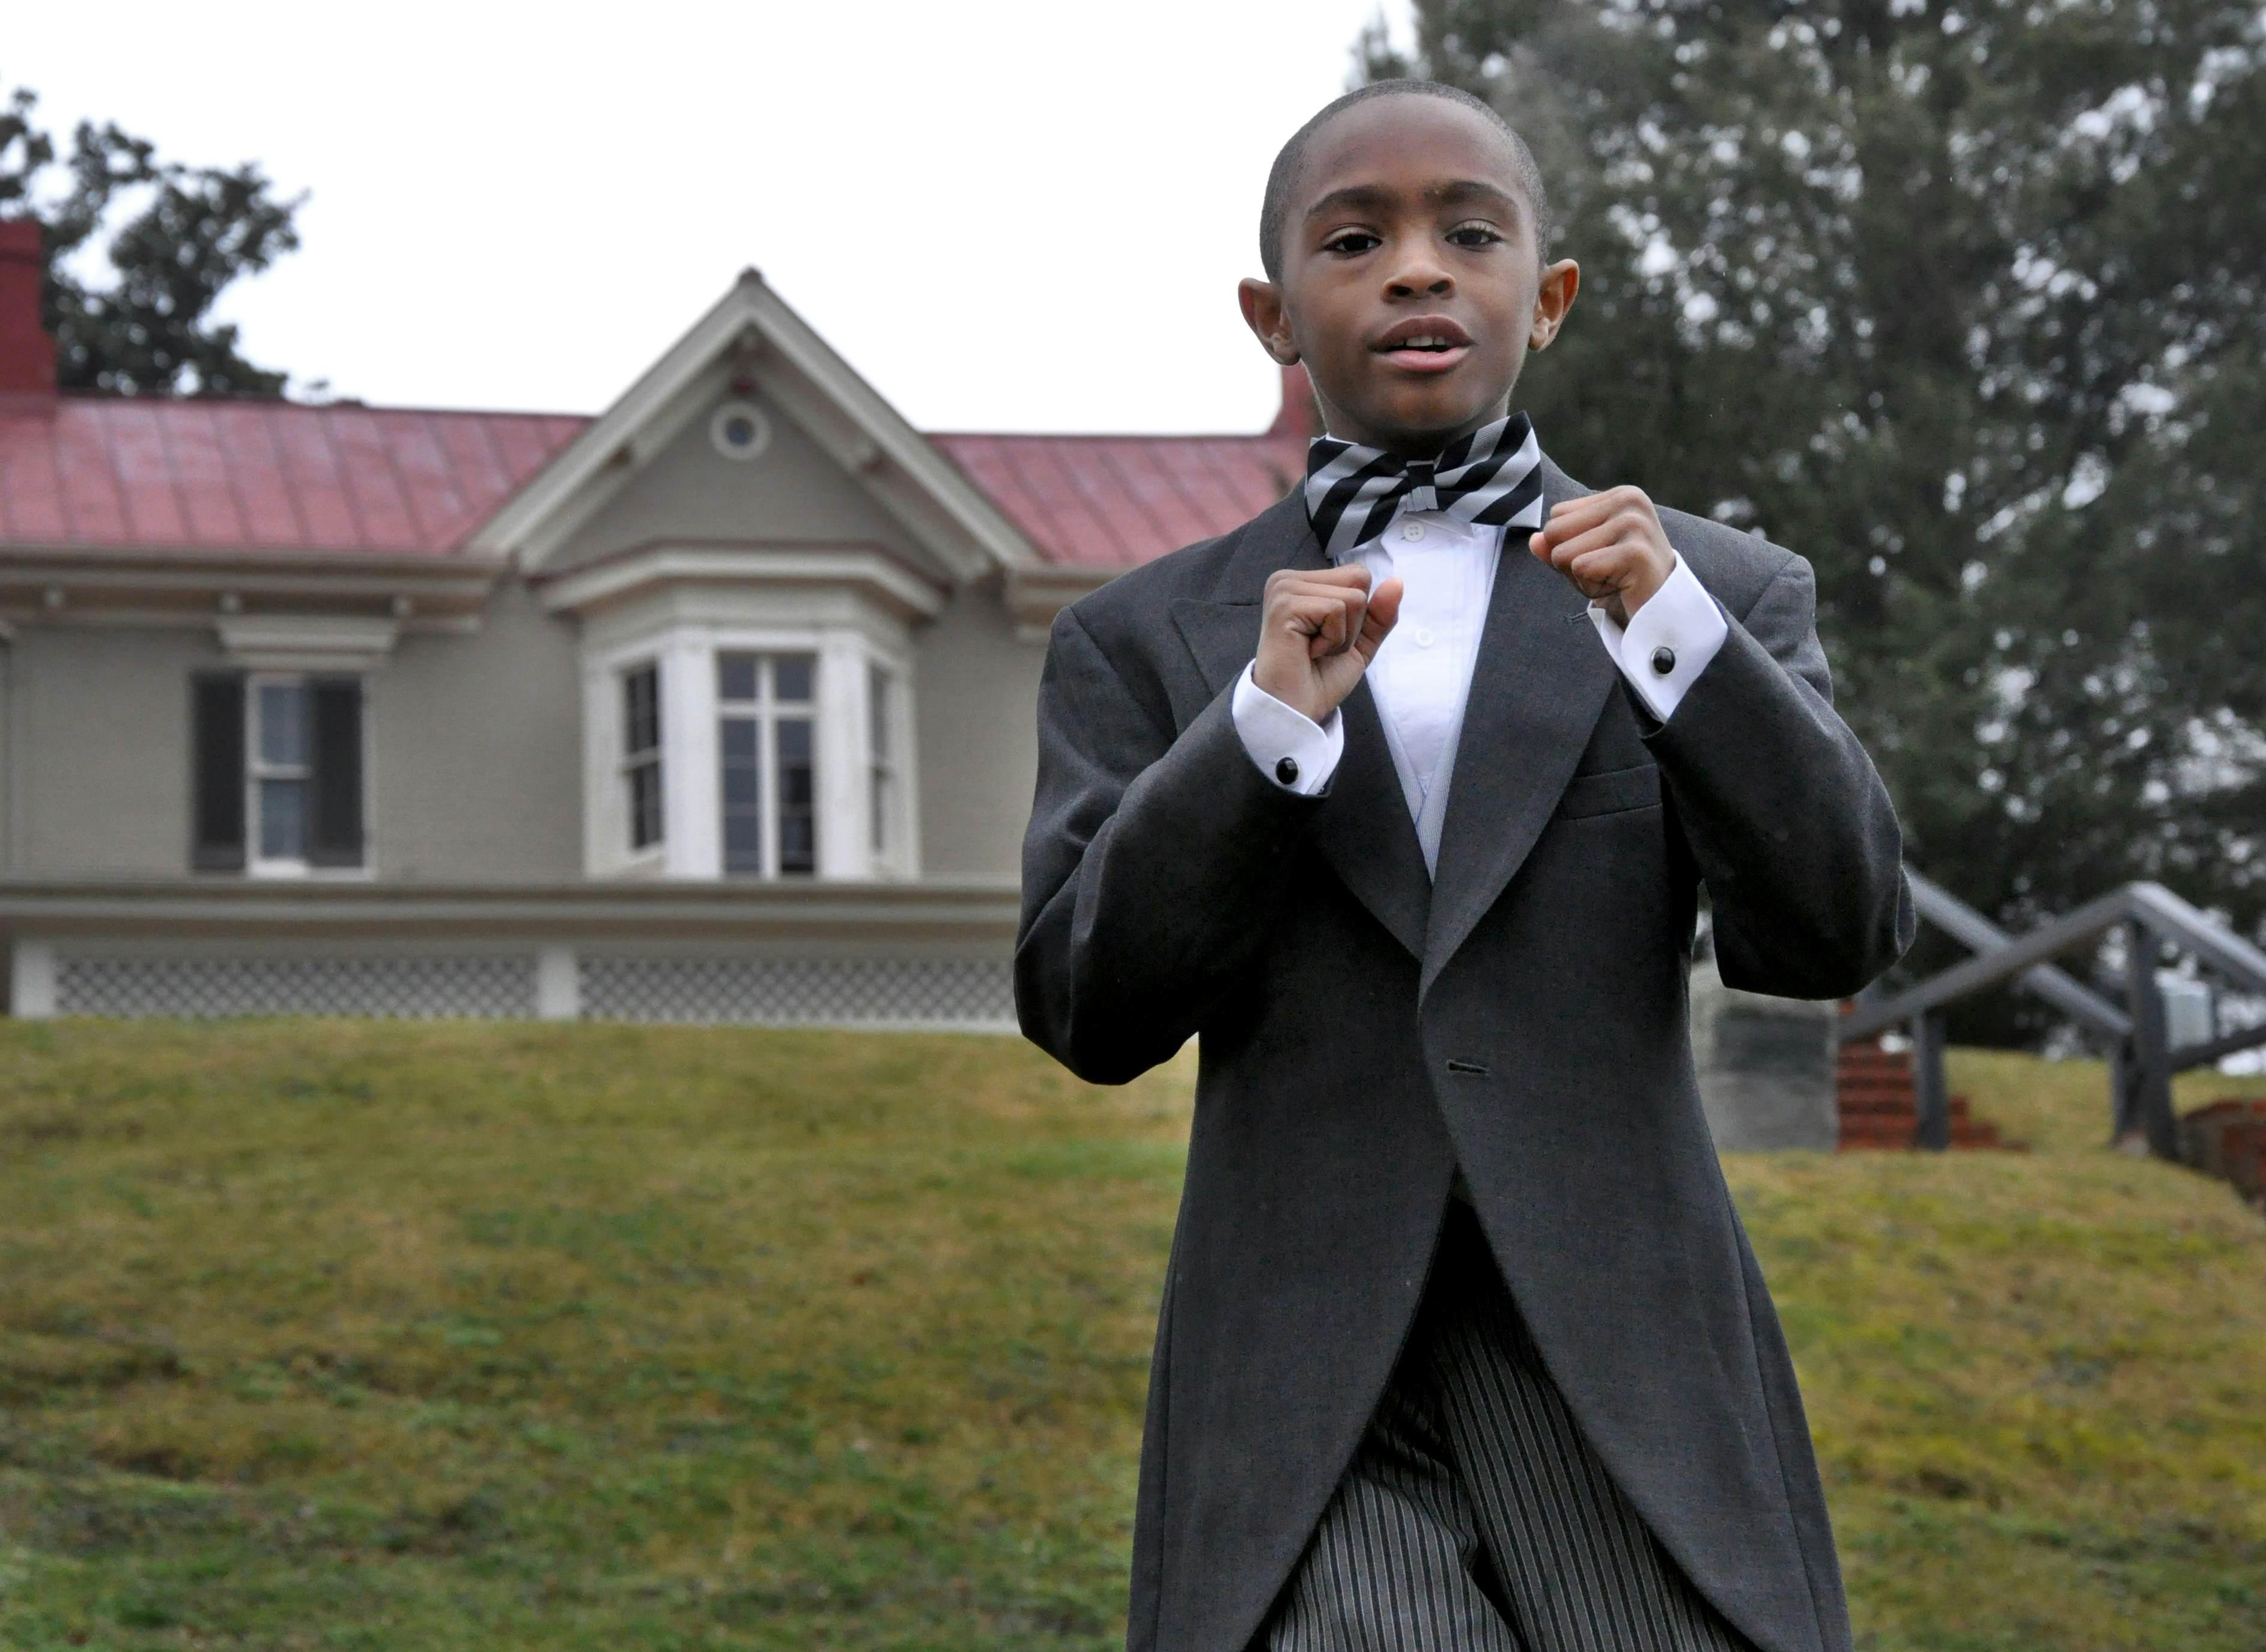 WASHINGTON, DC - FEBRUARY 11:  Brayden Wood, 8,  of Upper Marlboro, Md., one of the winners of the Frederick Douglass National Historical Site's oratorical competition, poses for a photograph in front of the historic Douglass home in southeast Washington, DC on February 11, 2012. He performed an excerpt from Douglass' famous speech, "Fighting Rebels With Only One Hand," 1861.  (Photo by Sonya Doctorian/The Washington Post via Getty Images)